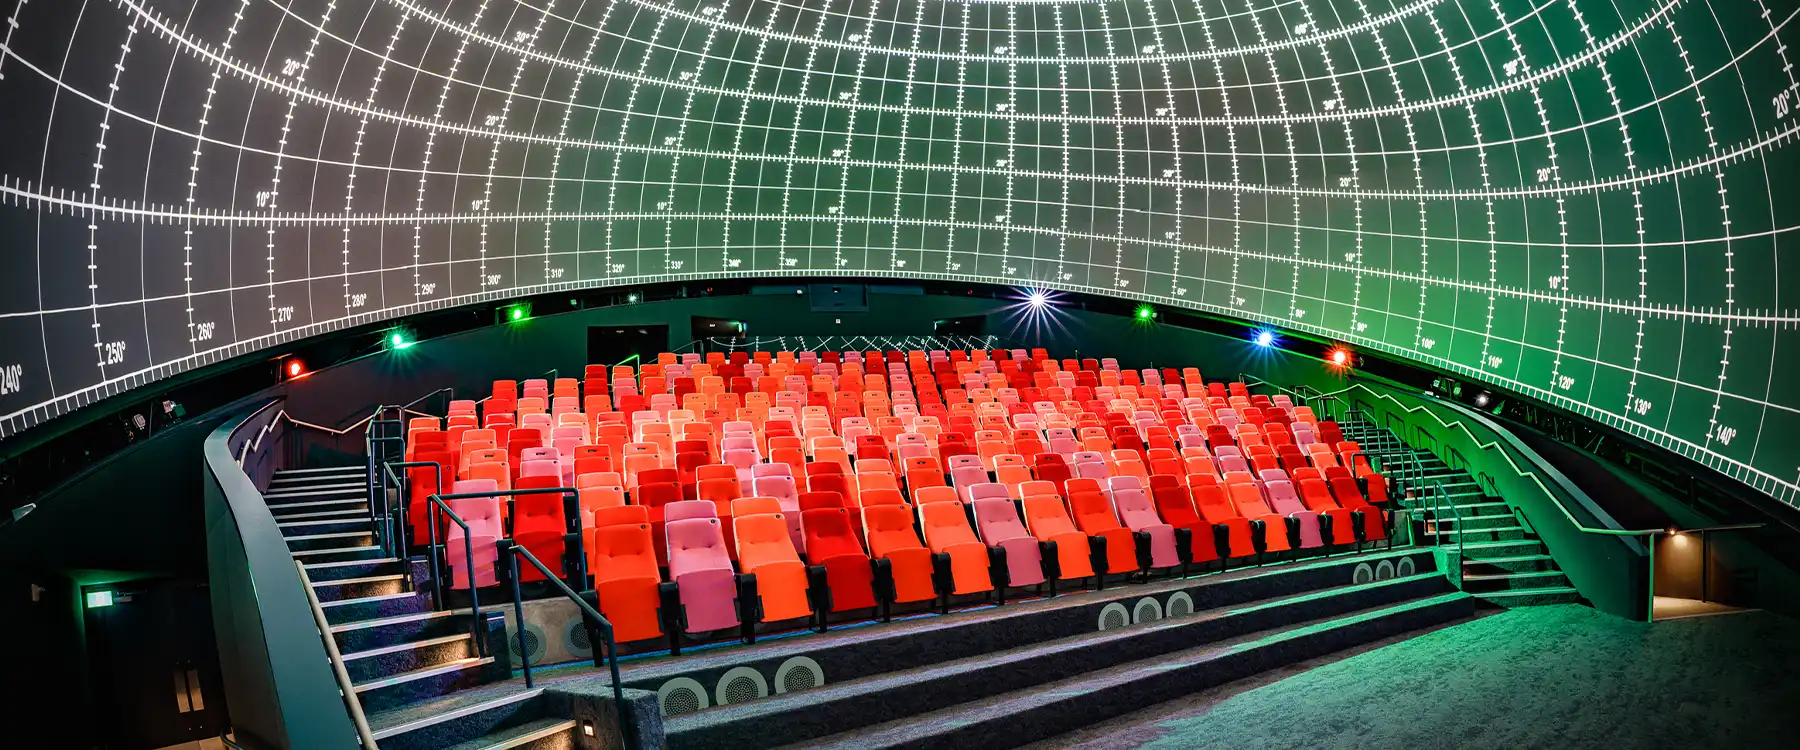 TELUS Spark's newly revamped Infinity Dome theatre reopens